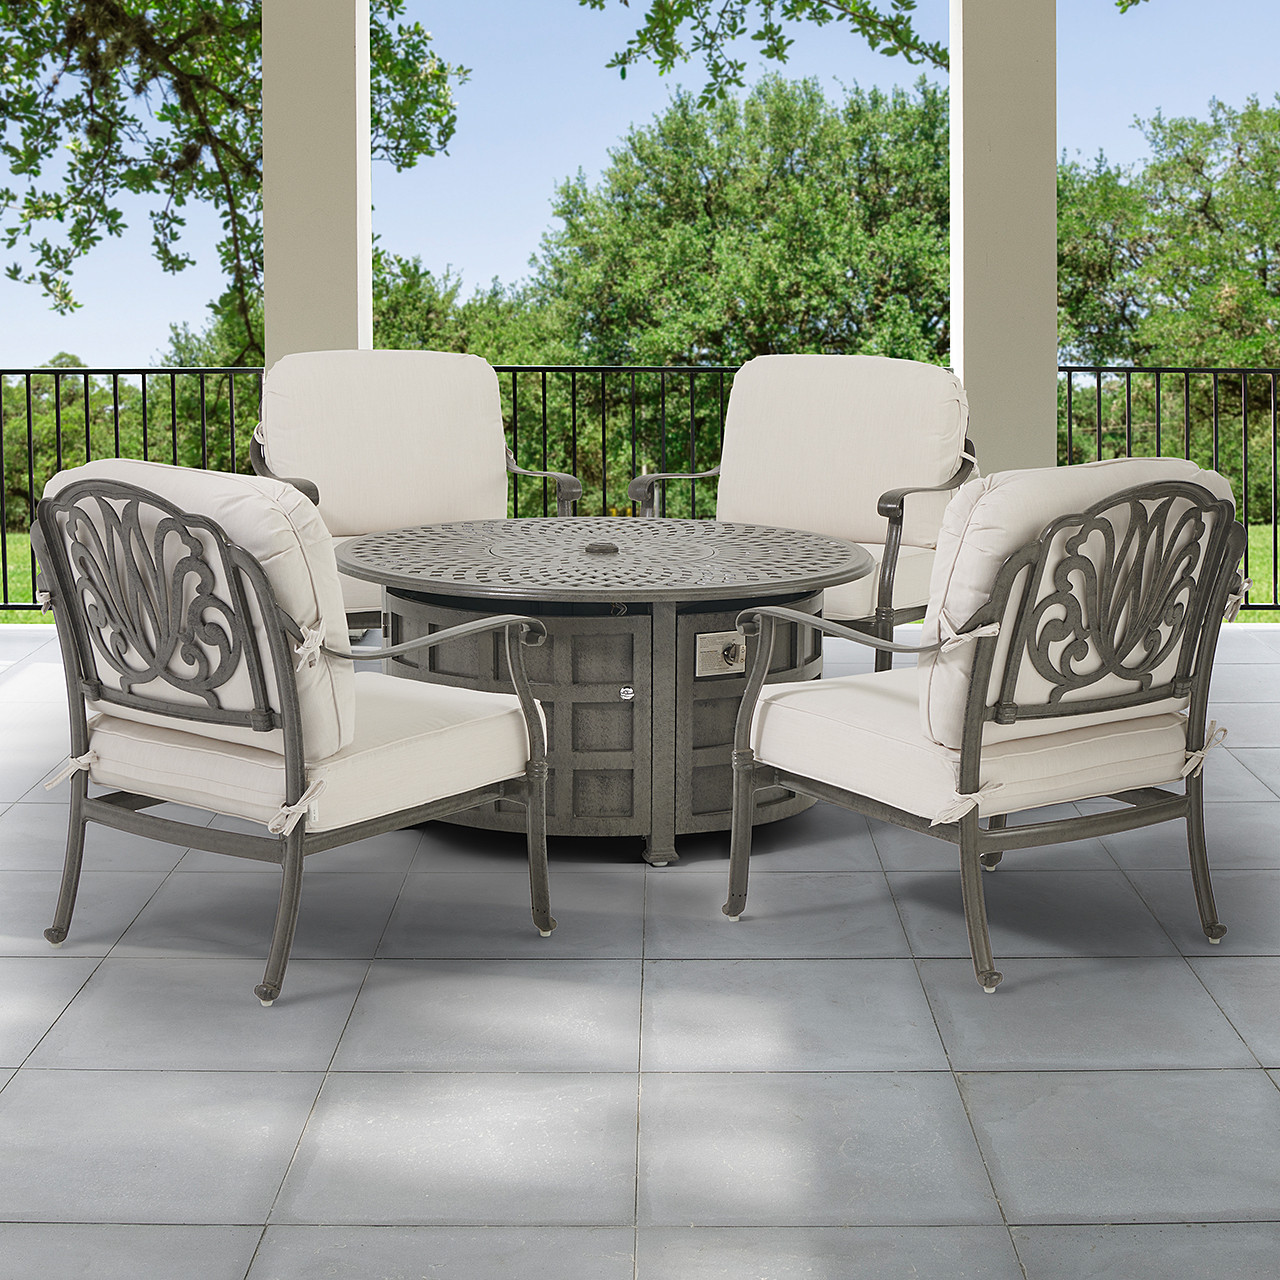 Cadiz Saddle Grey Cast Aluminum with Cushions 5 pc. Chat Group + 48 in. D LP Gas Fire Pit Table